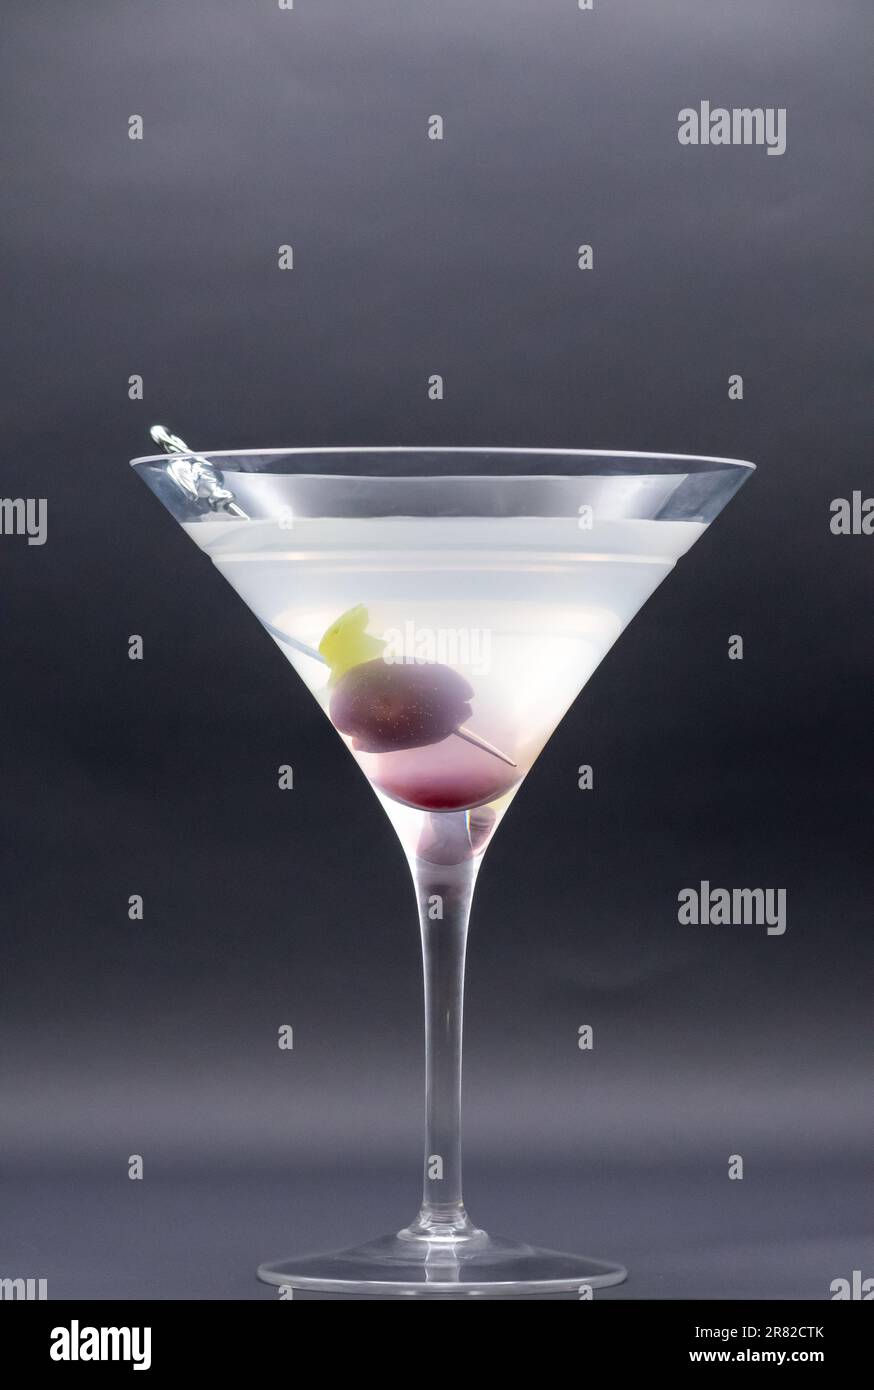 Tempting Twist: Martini with Luscious Cherry Garnish Steals the Show with flamingo pick on side of glass isolated on black background Stock Photo